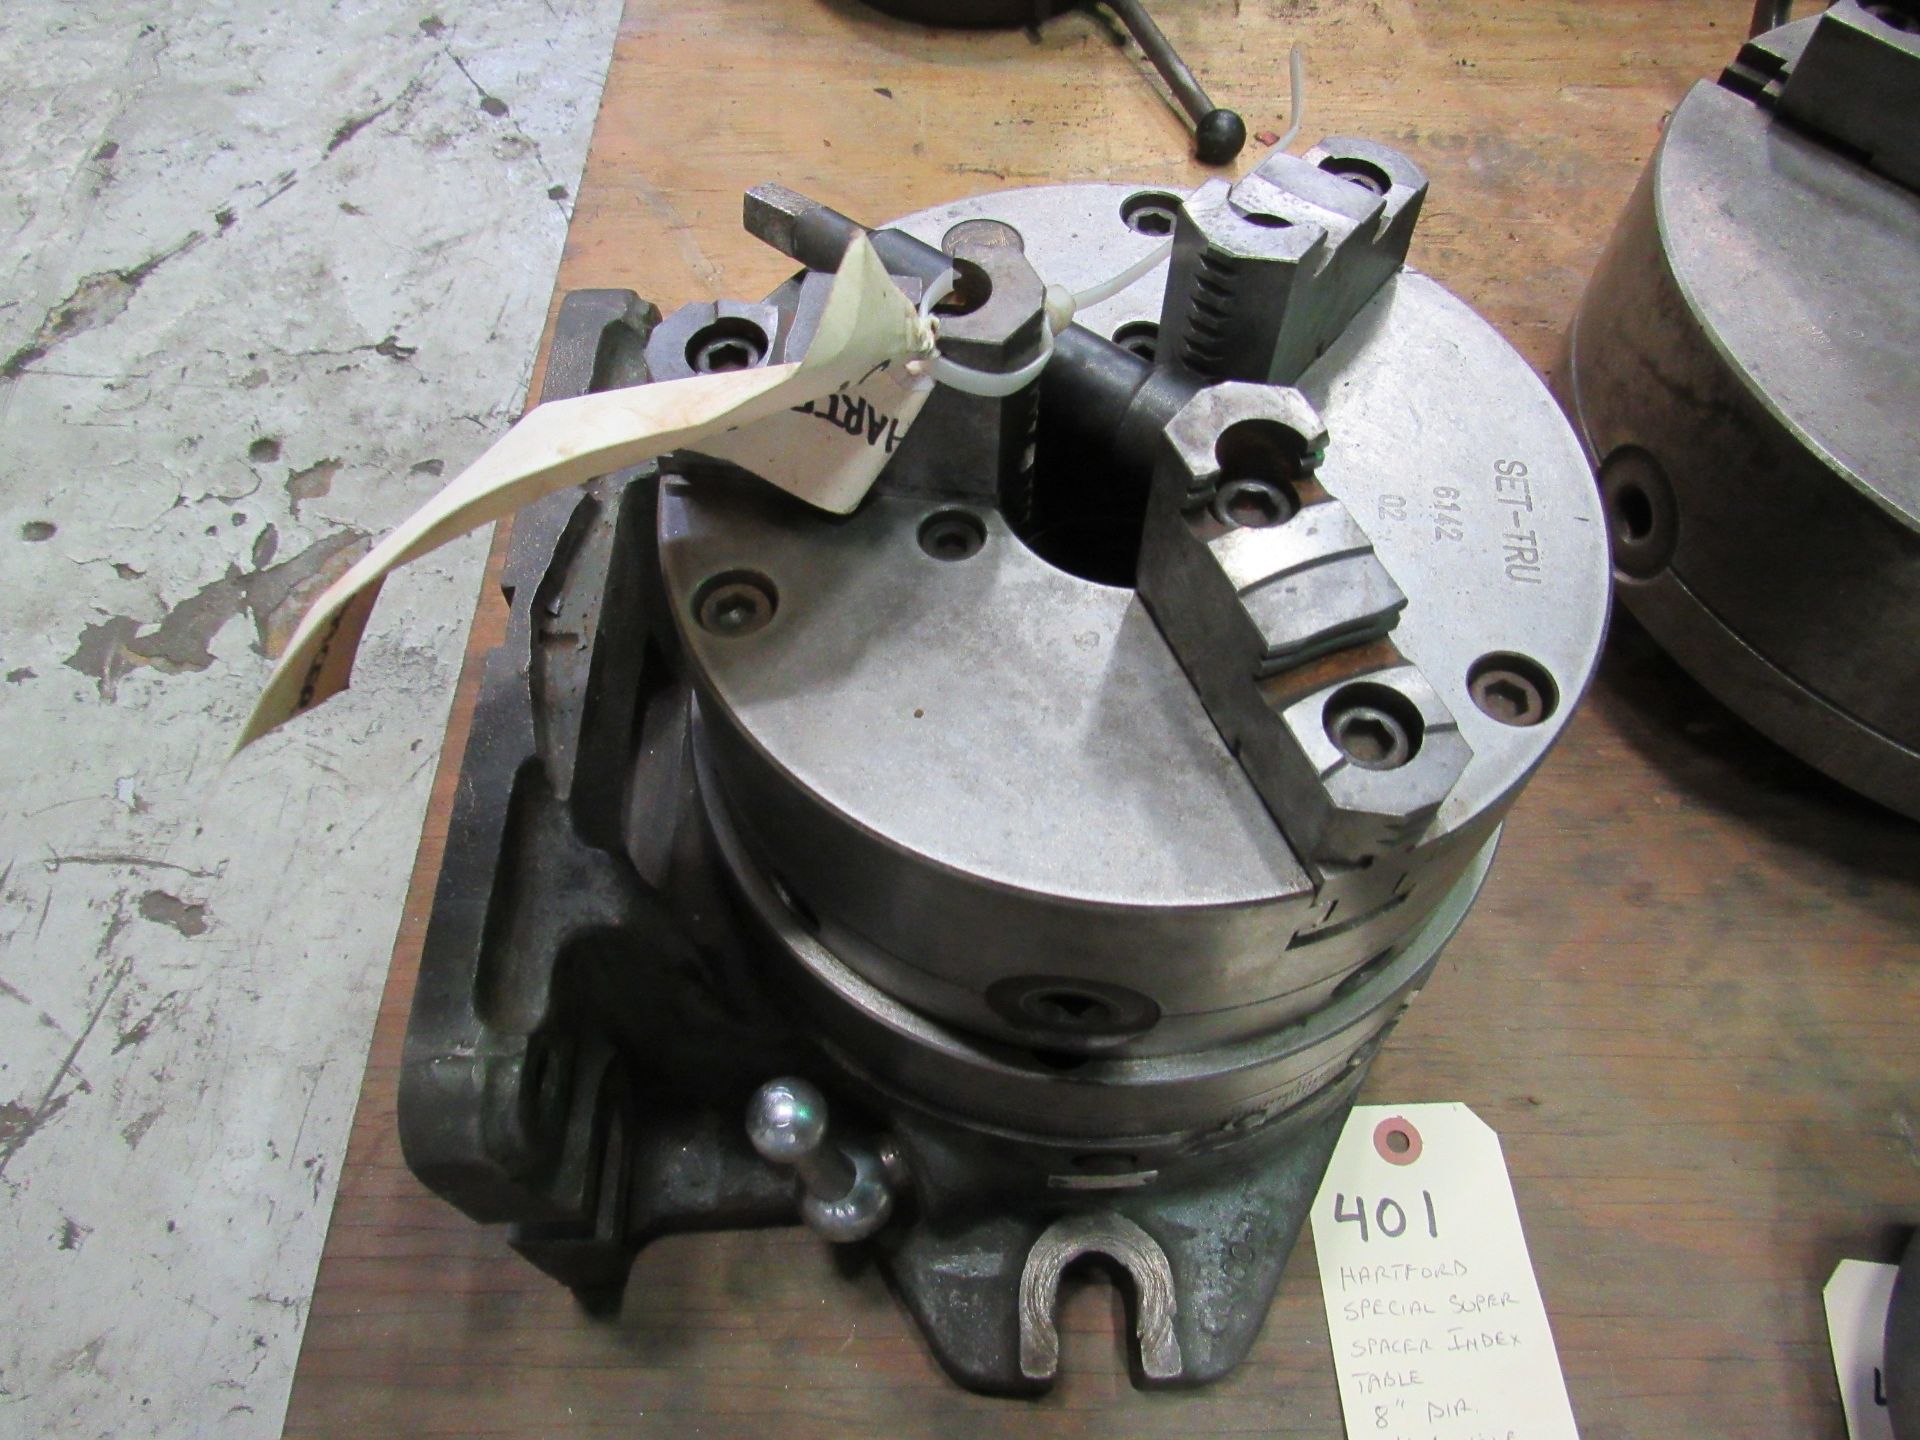 8" 3-Jaw Hartford Special Super Spacer Index Table, 8" dia. 3-jaw chuck, non-cumulative indexing